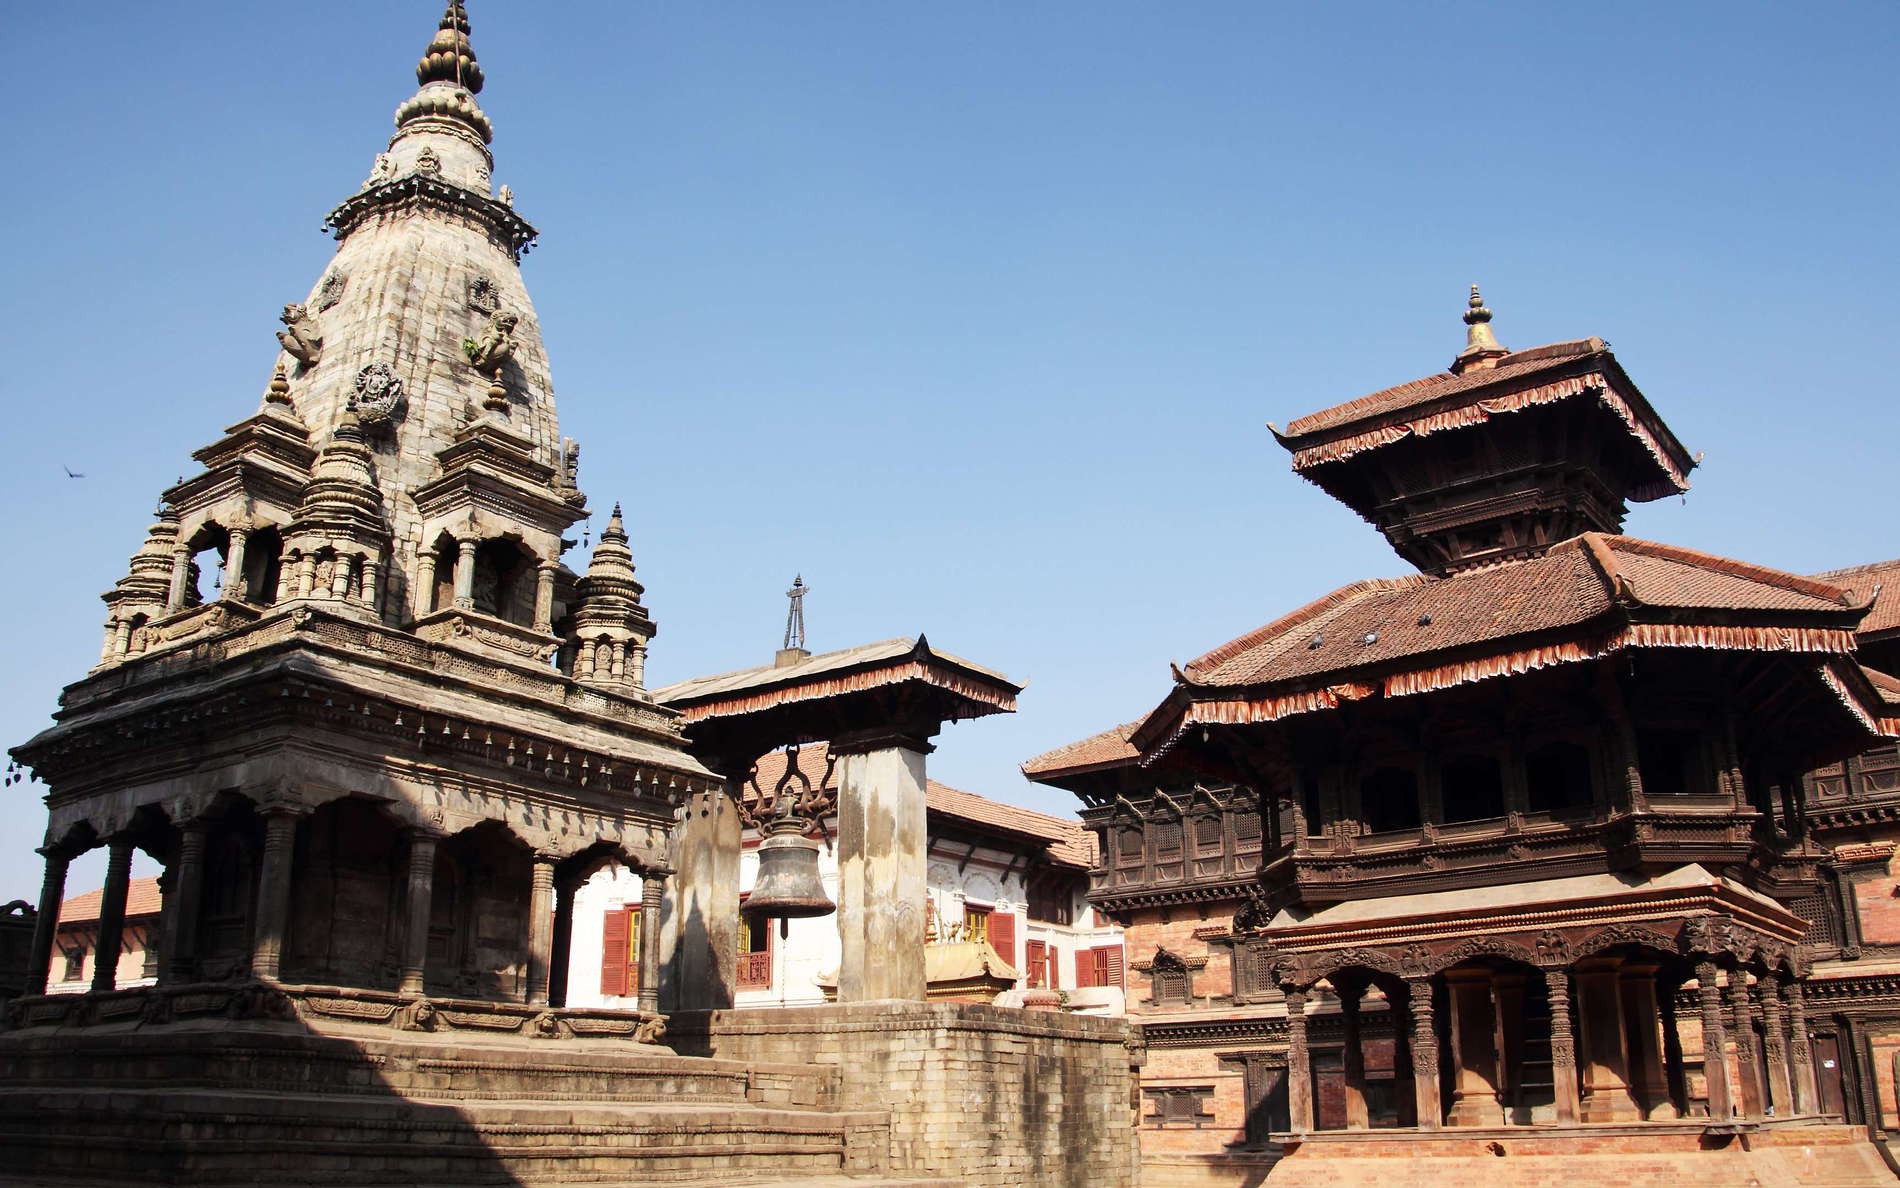 Bhaktapur Durbar Square with temples